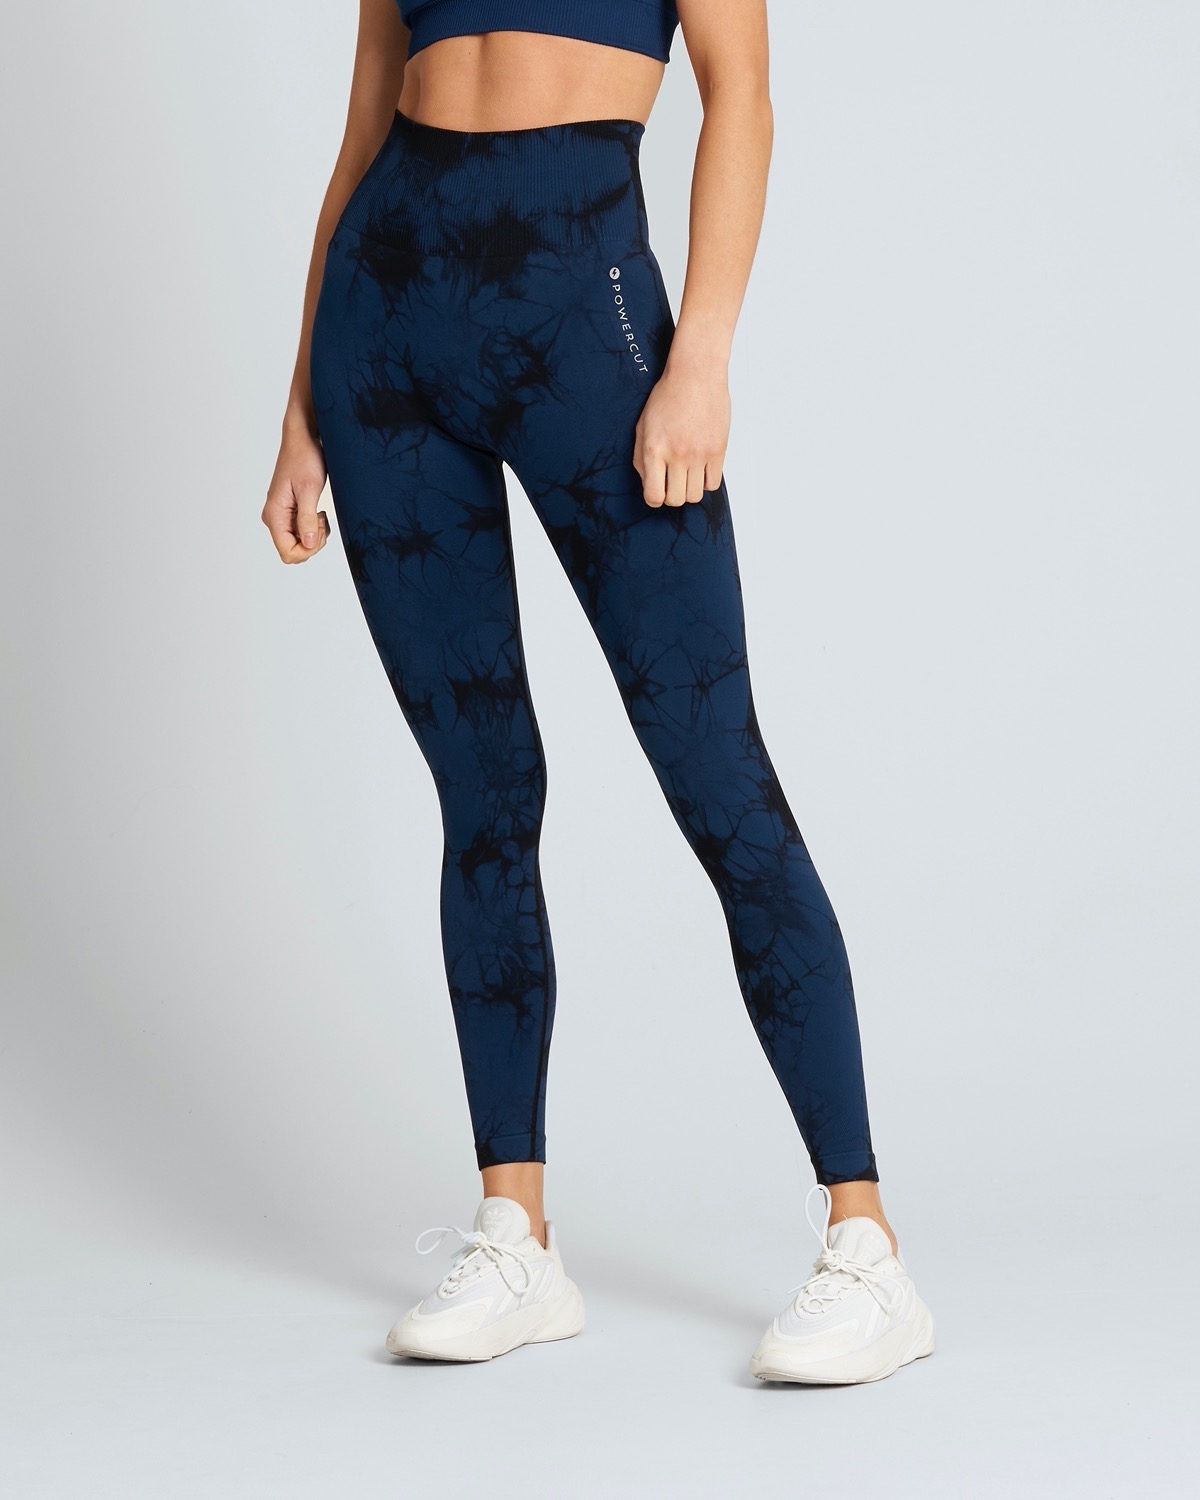 https://dunnes.btxmedia.com/pws/client/images/catalogue/products/1551127/zoom/1551127_navy.jpg